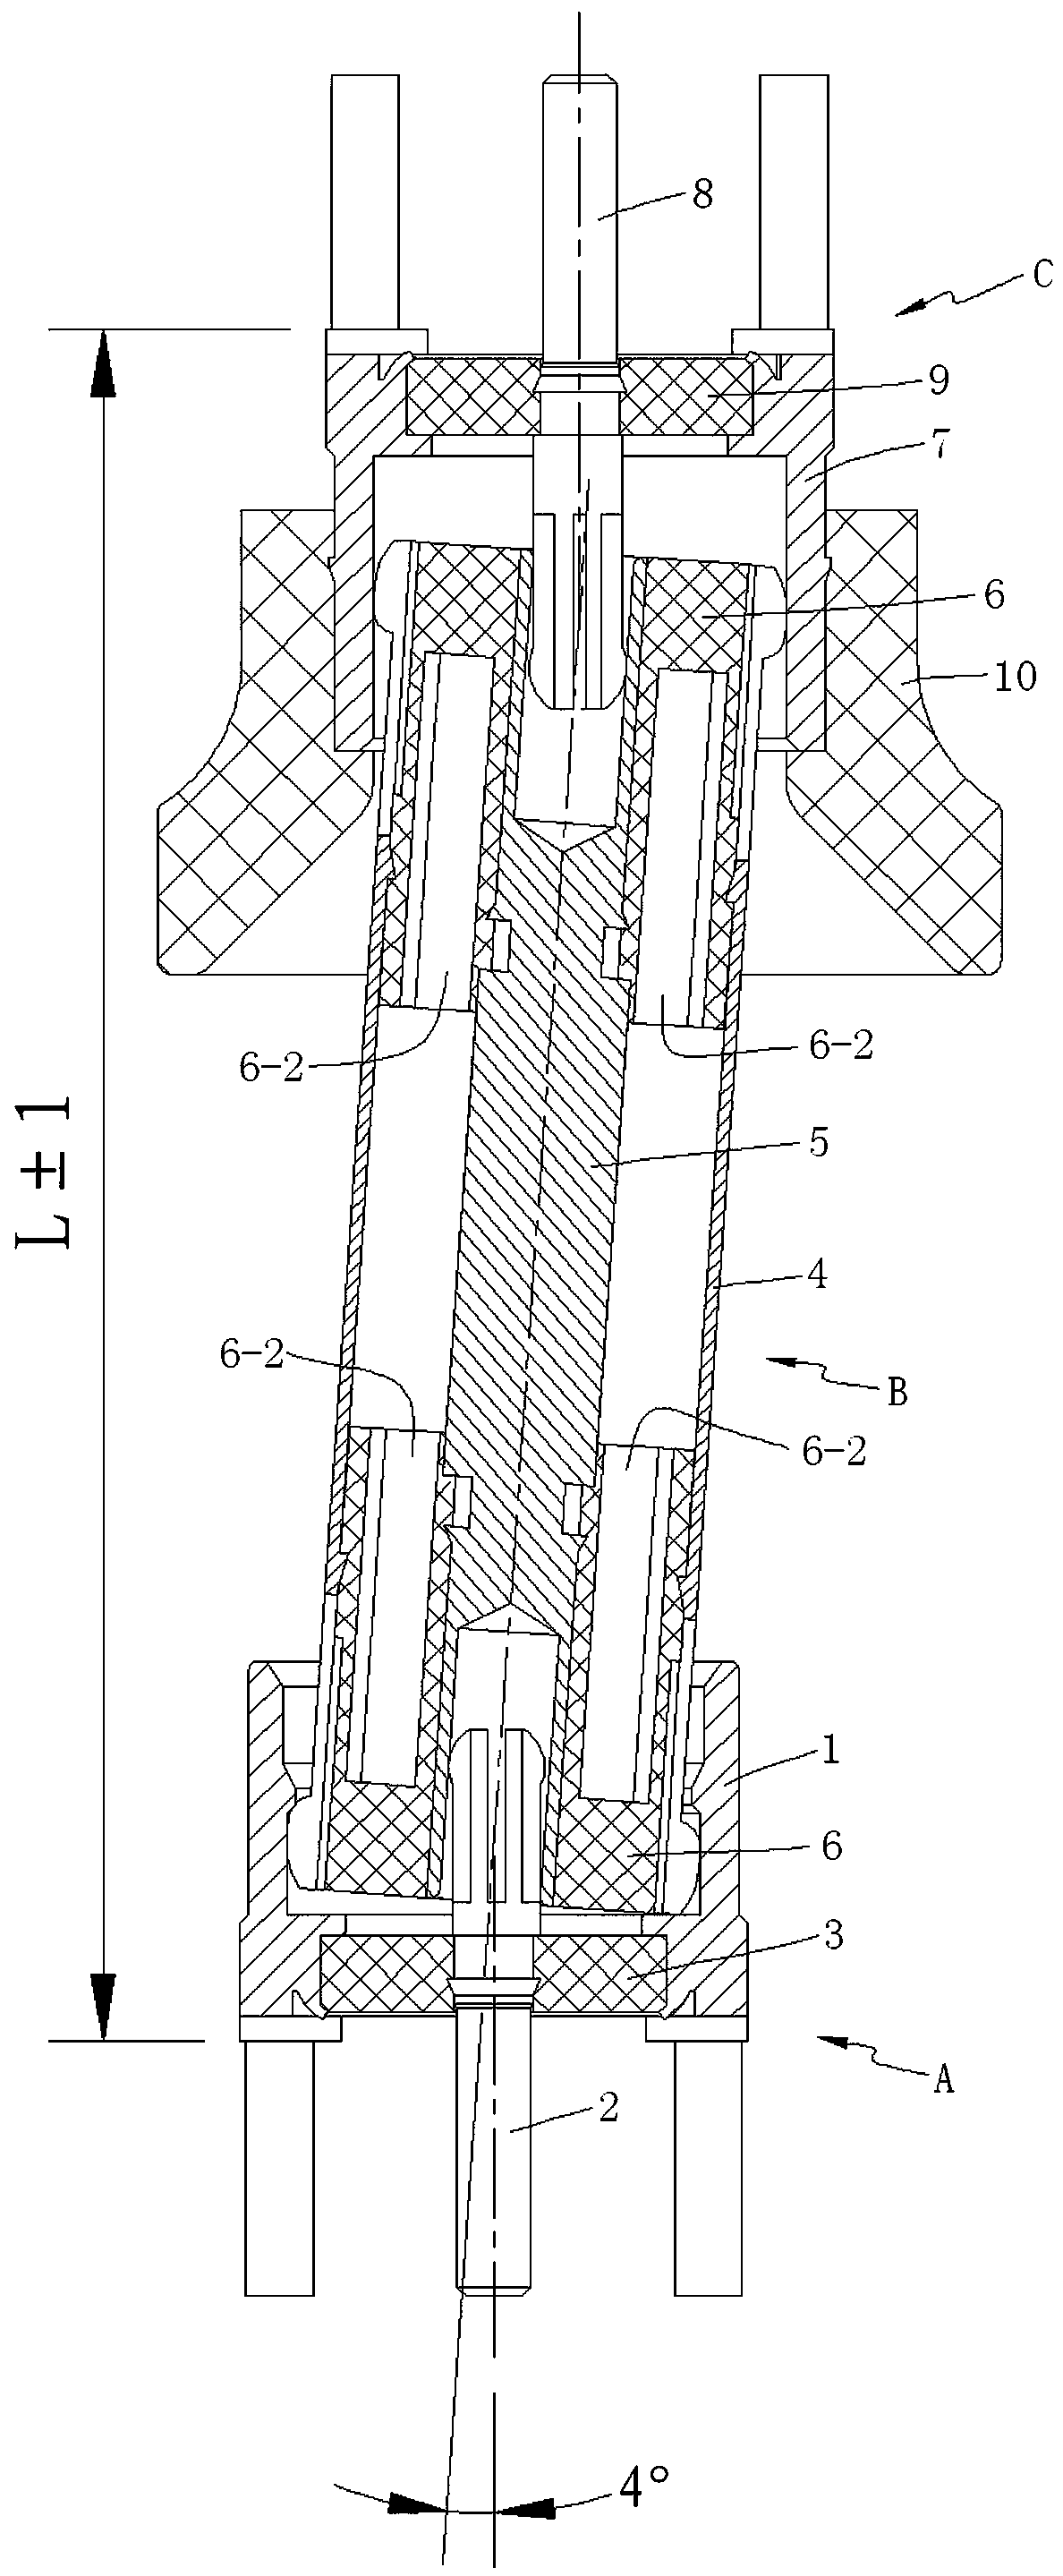 Radio frequency coaxial connector assembly suitable for blind matching and capable of allowing insertion offset